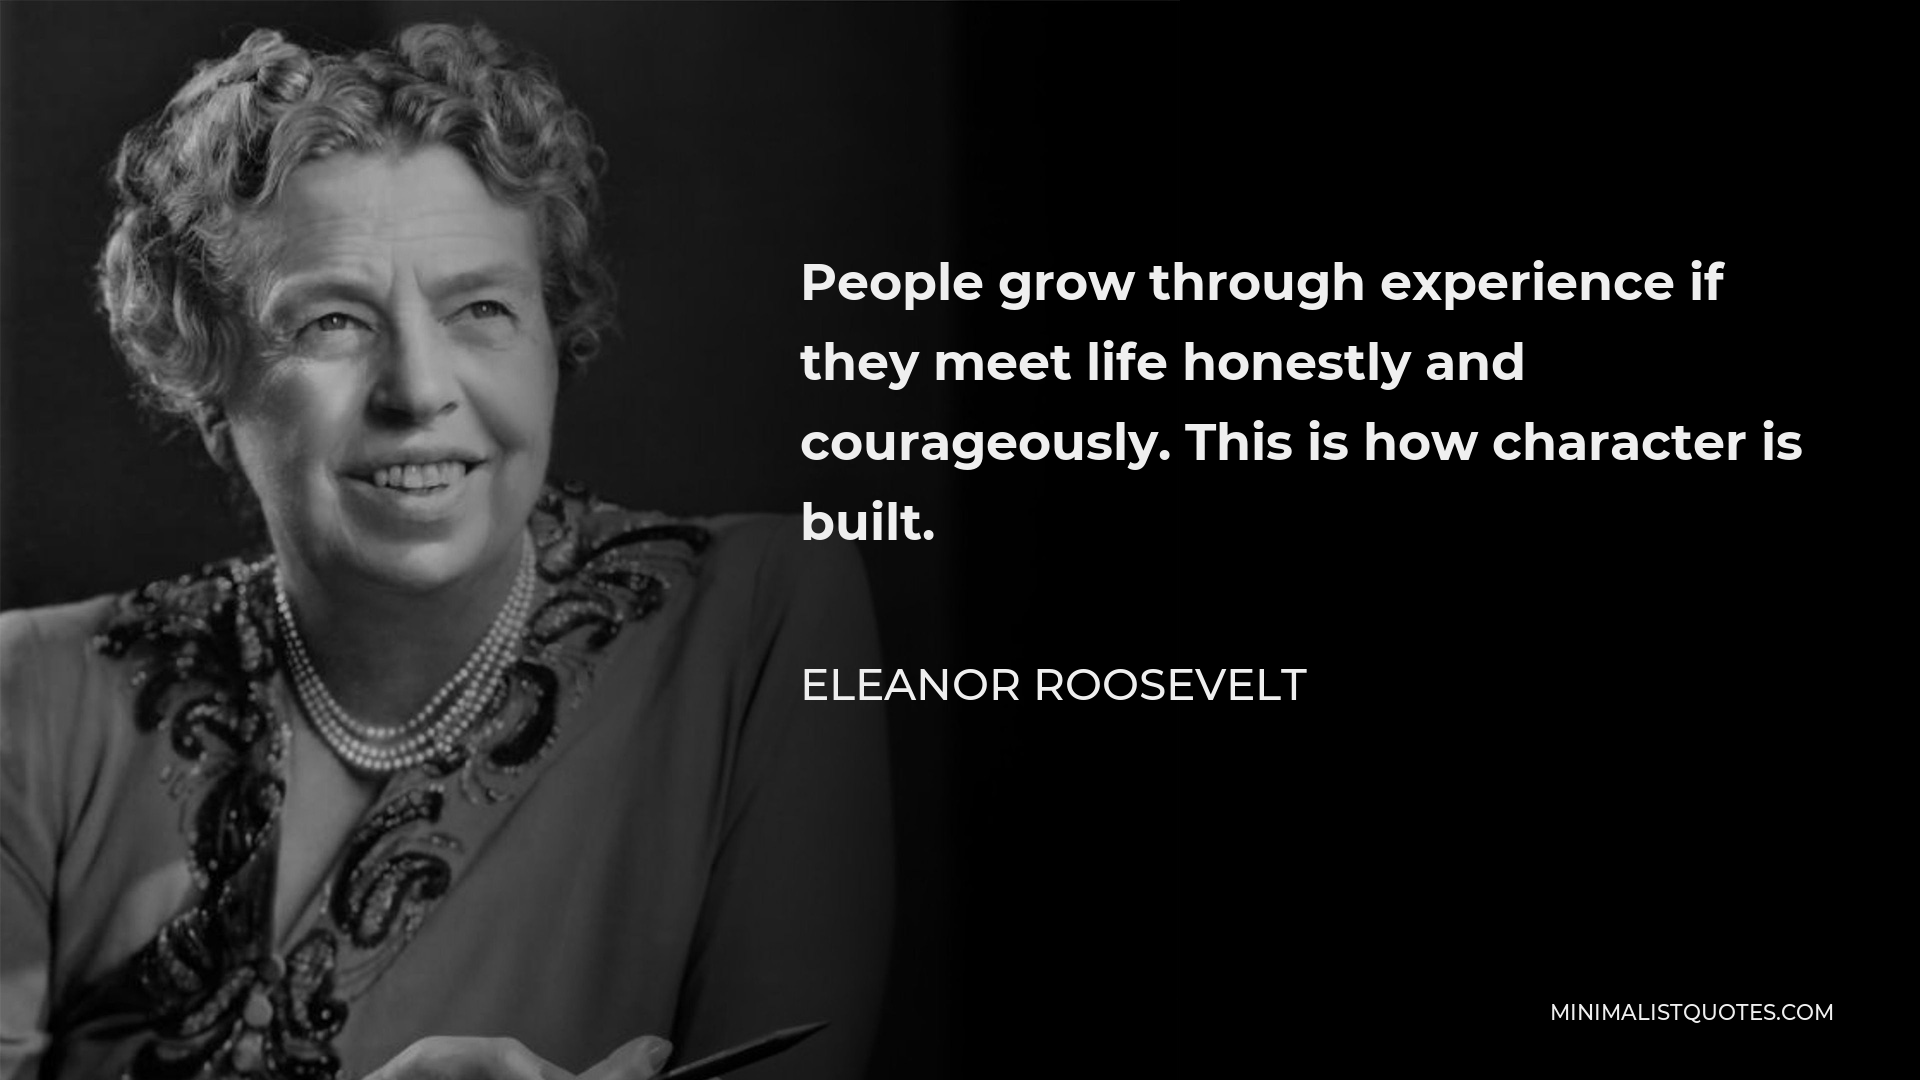 Eleanor Roosevelt Quote - People grow through experience if they meet life honestly and courageously. This is how character is built.